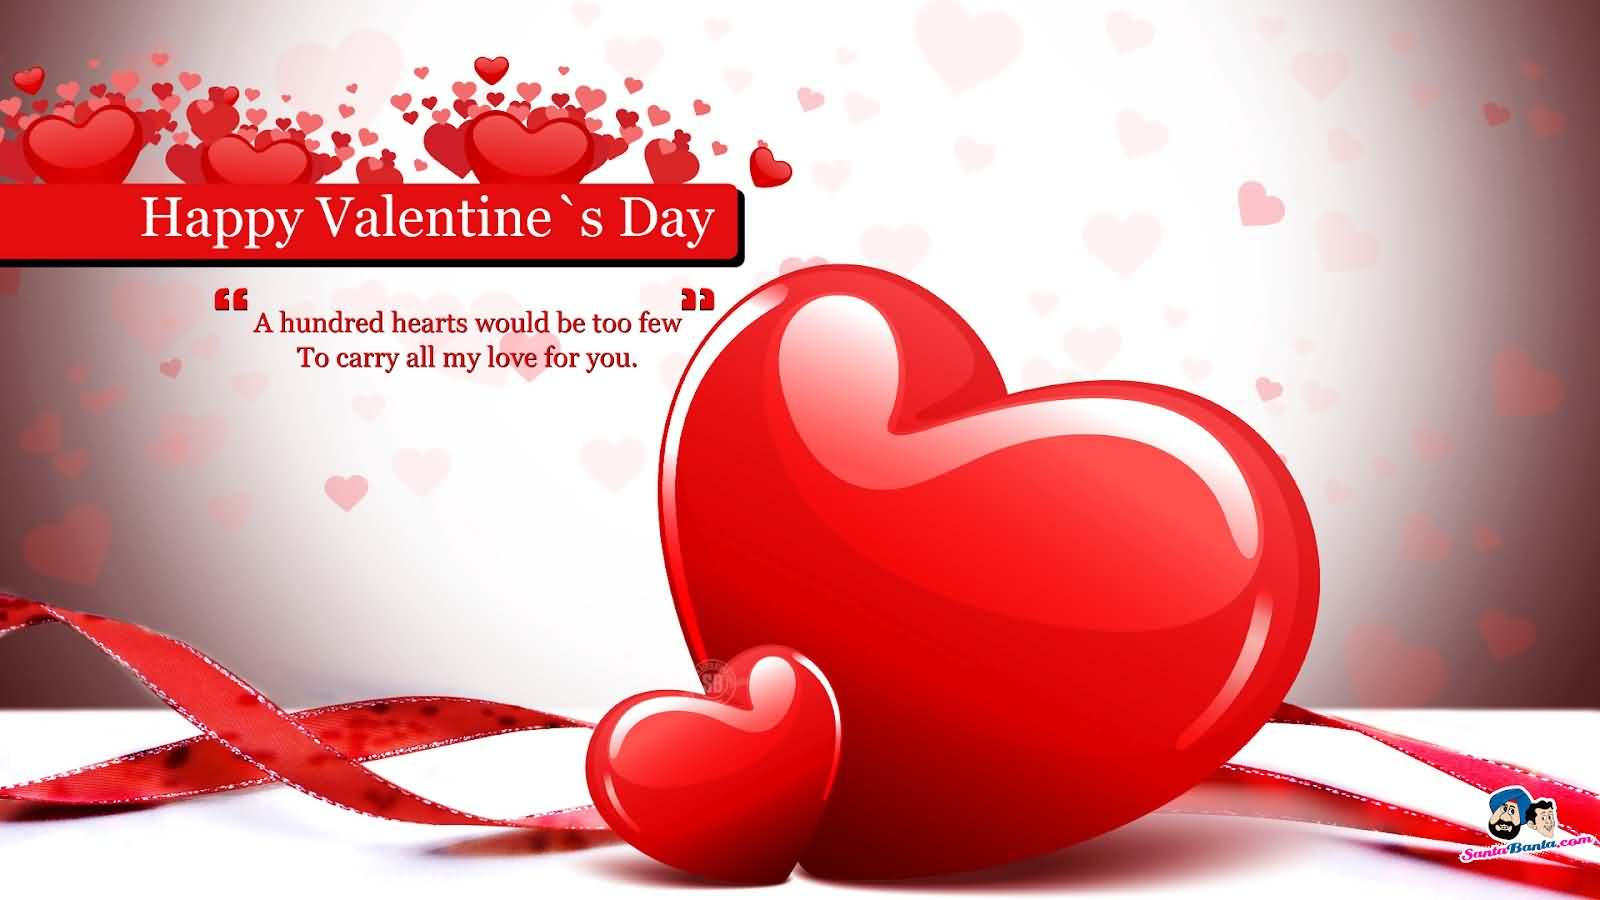 A hundred hearts would be too few to carry all my love for you Happy Valentines Day